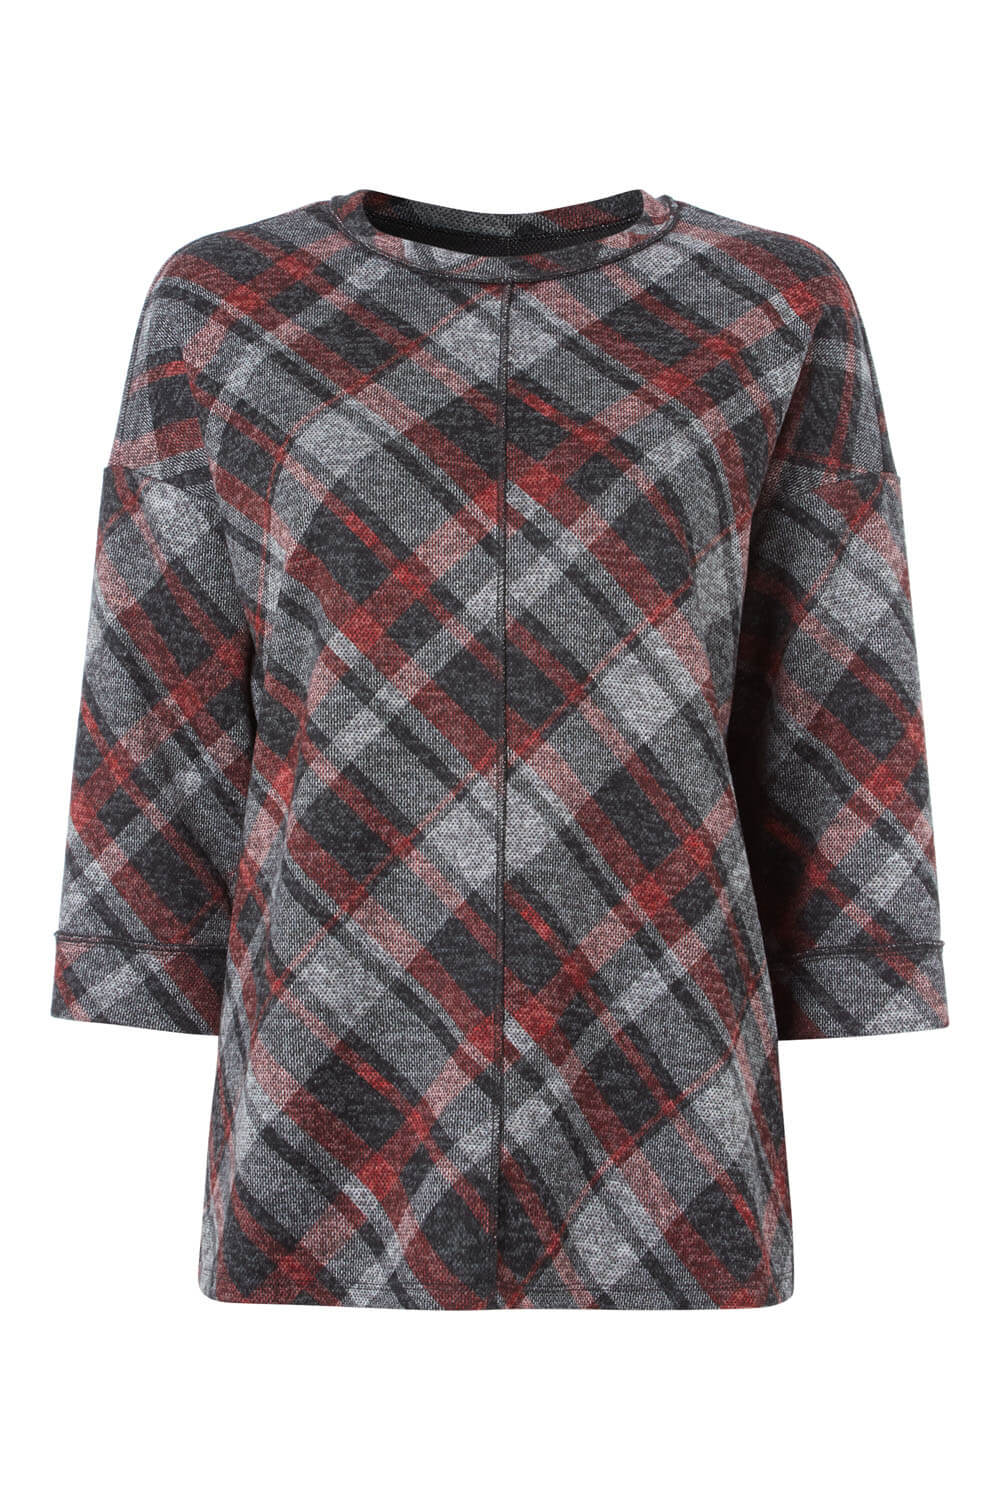 Red 3/4 Sleeve Check Print Top, Image 5 of 5